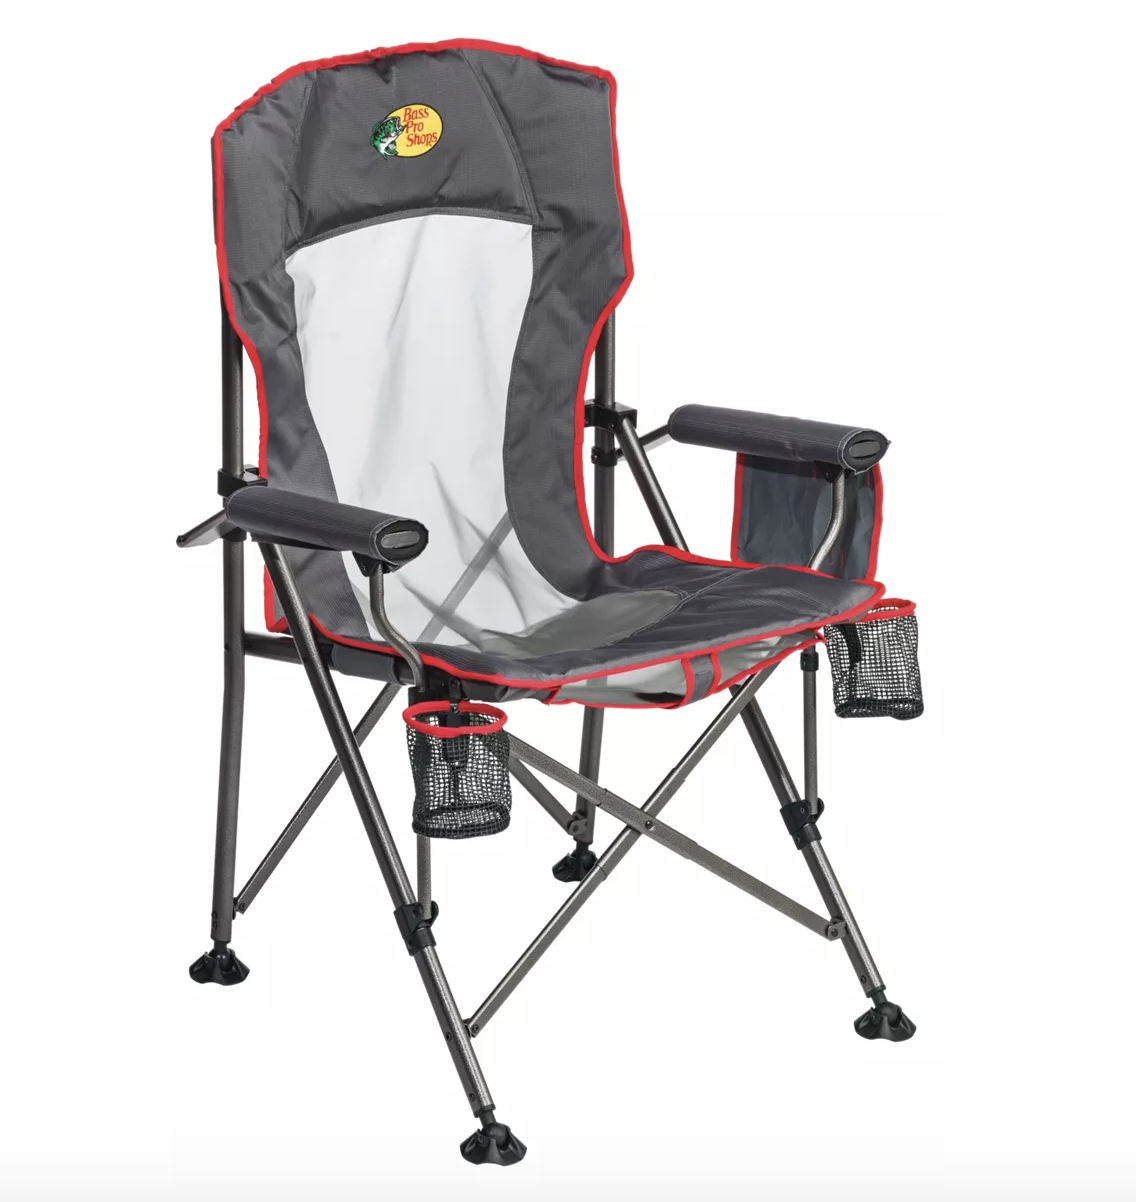 Lunker Lounger Fishing Chair